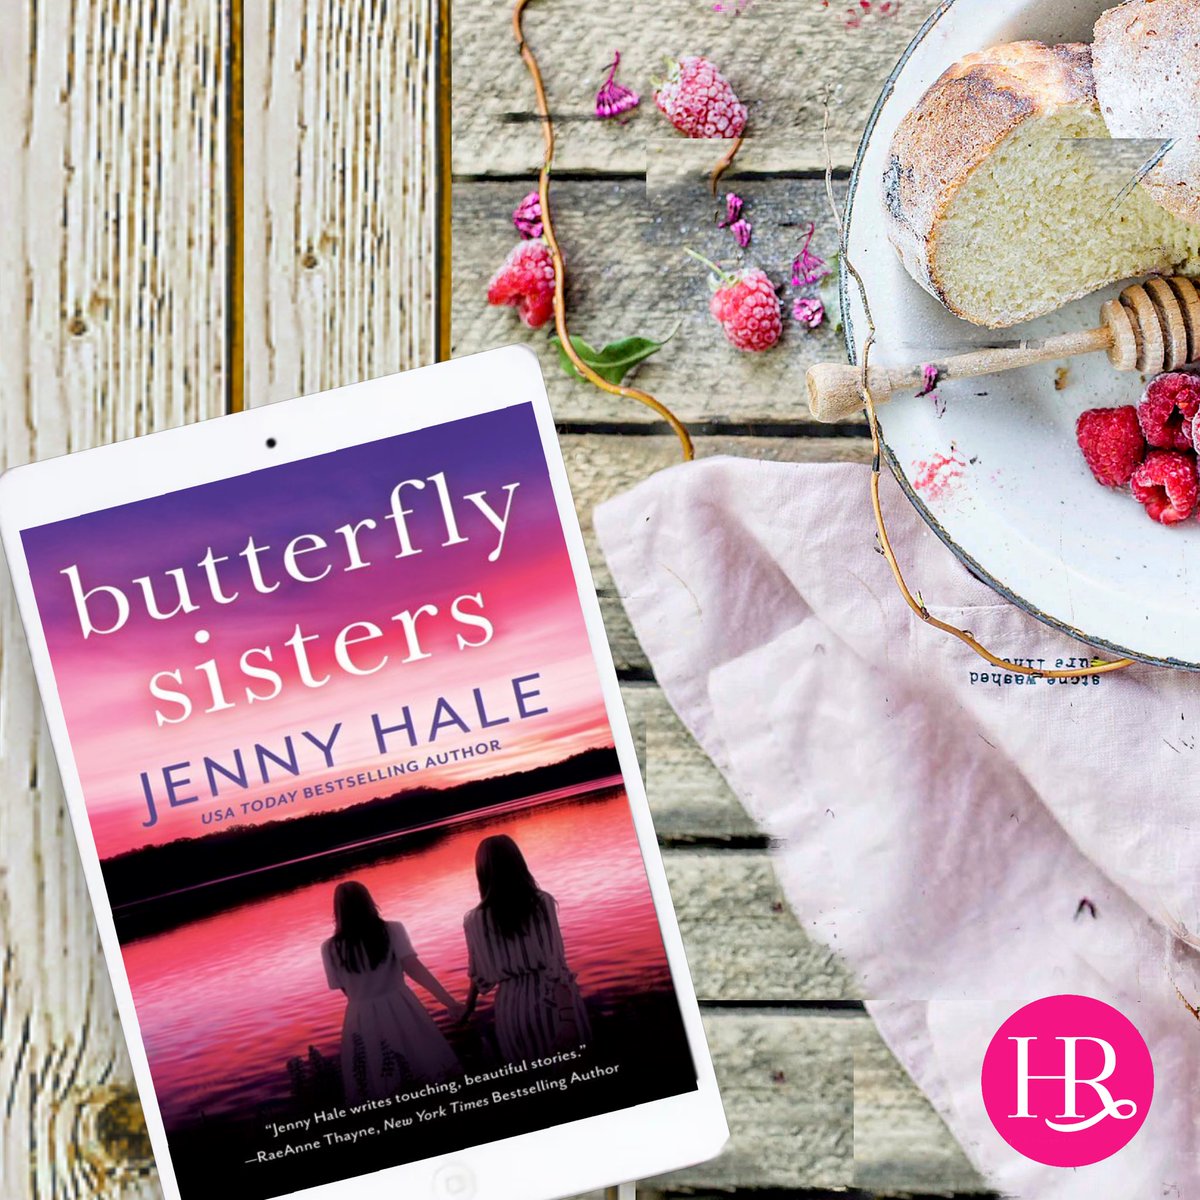 ICYMI, we revealed the cover of the BRAND NEW novel by @jhaleauthor! You like? 

PRE-ORDER HERE: https://t.co/R9sttQisqT https://t.co/s3JkmJrQsQ